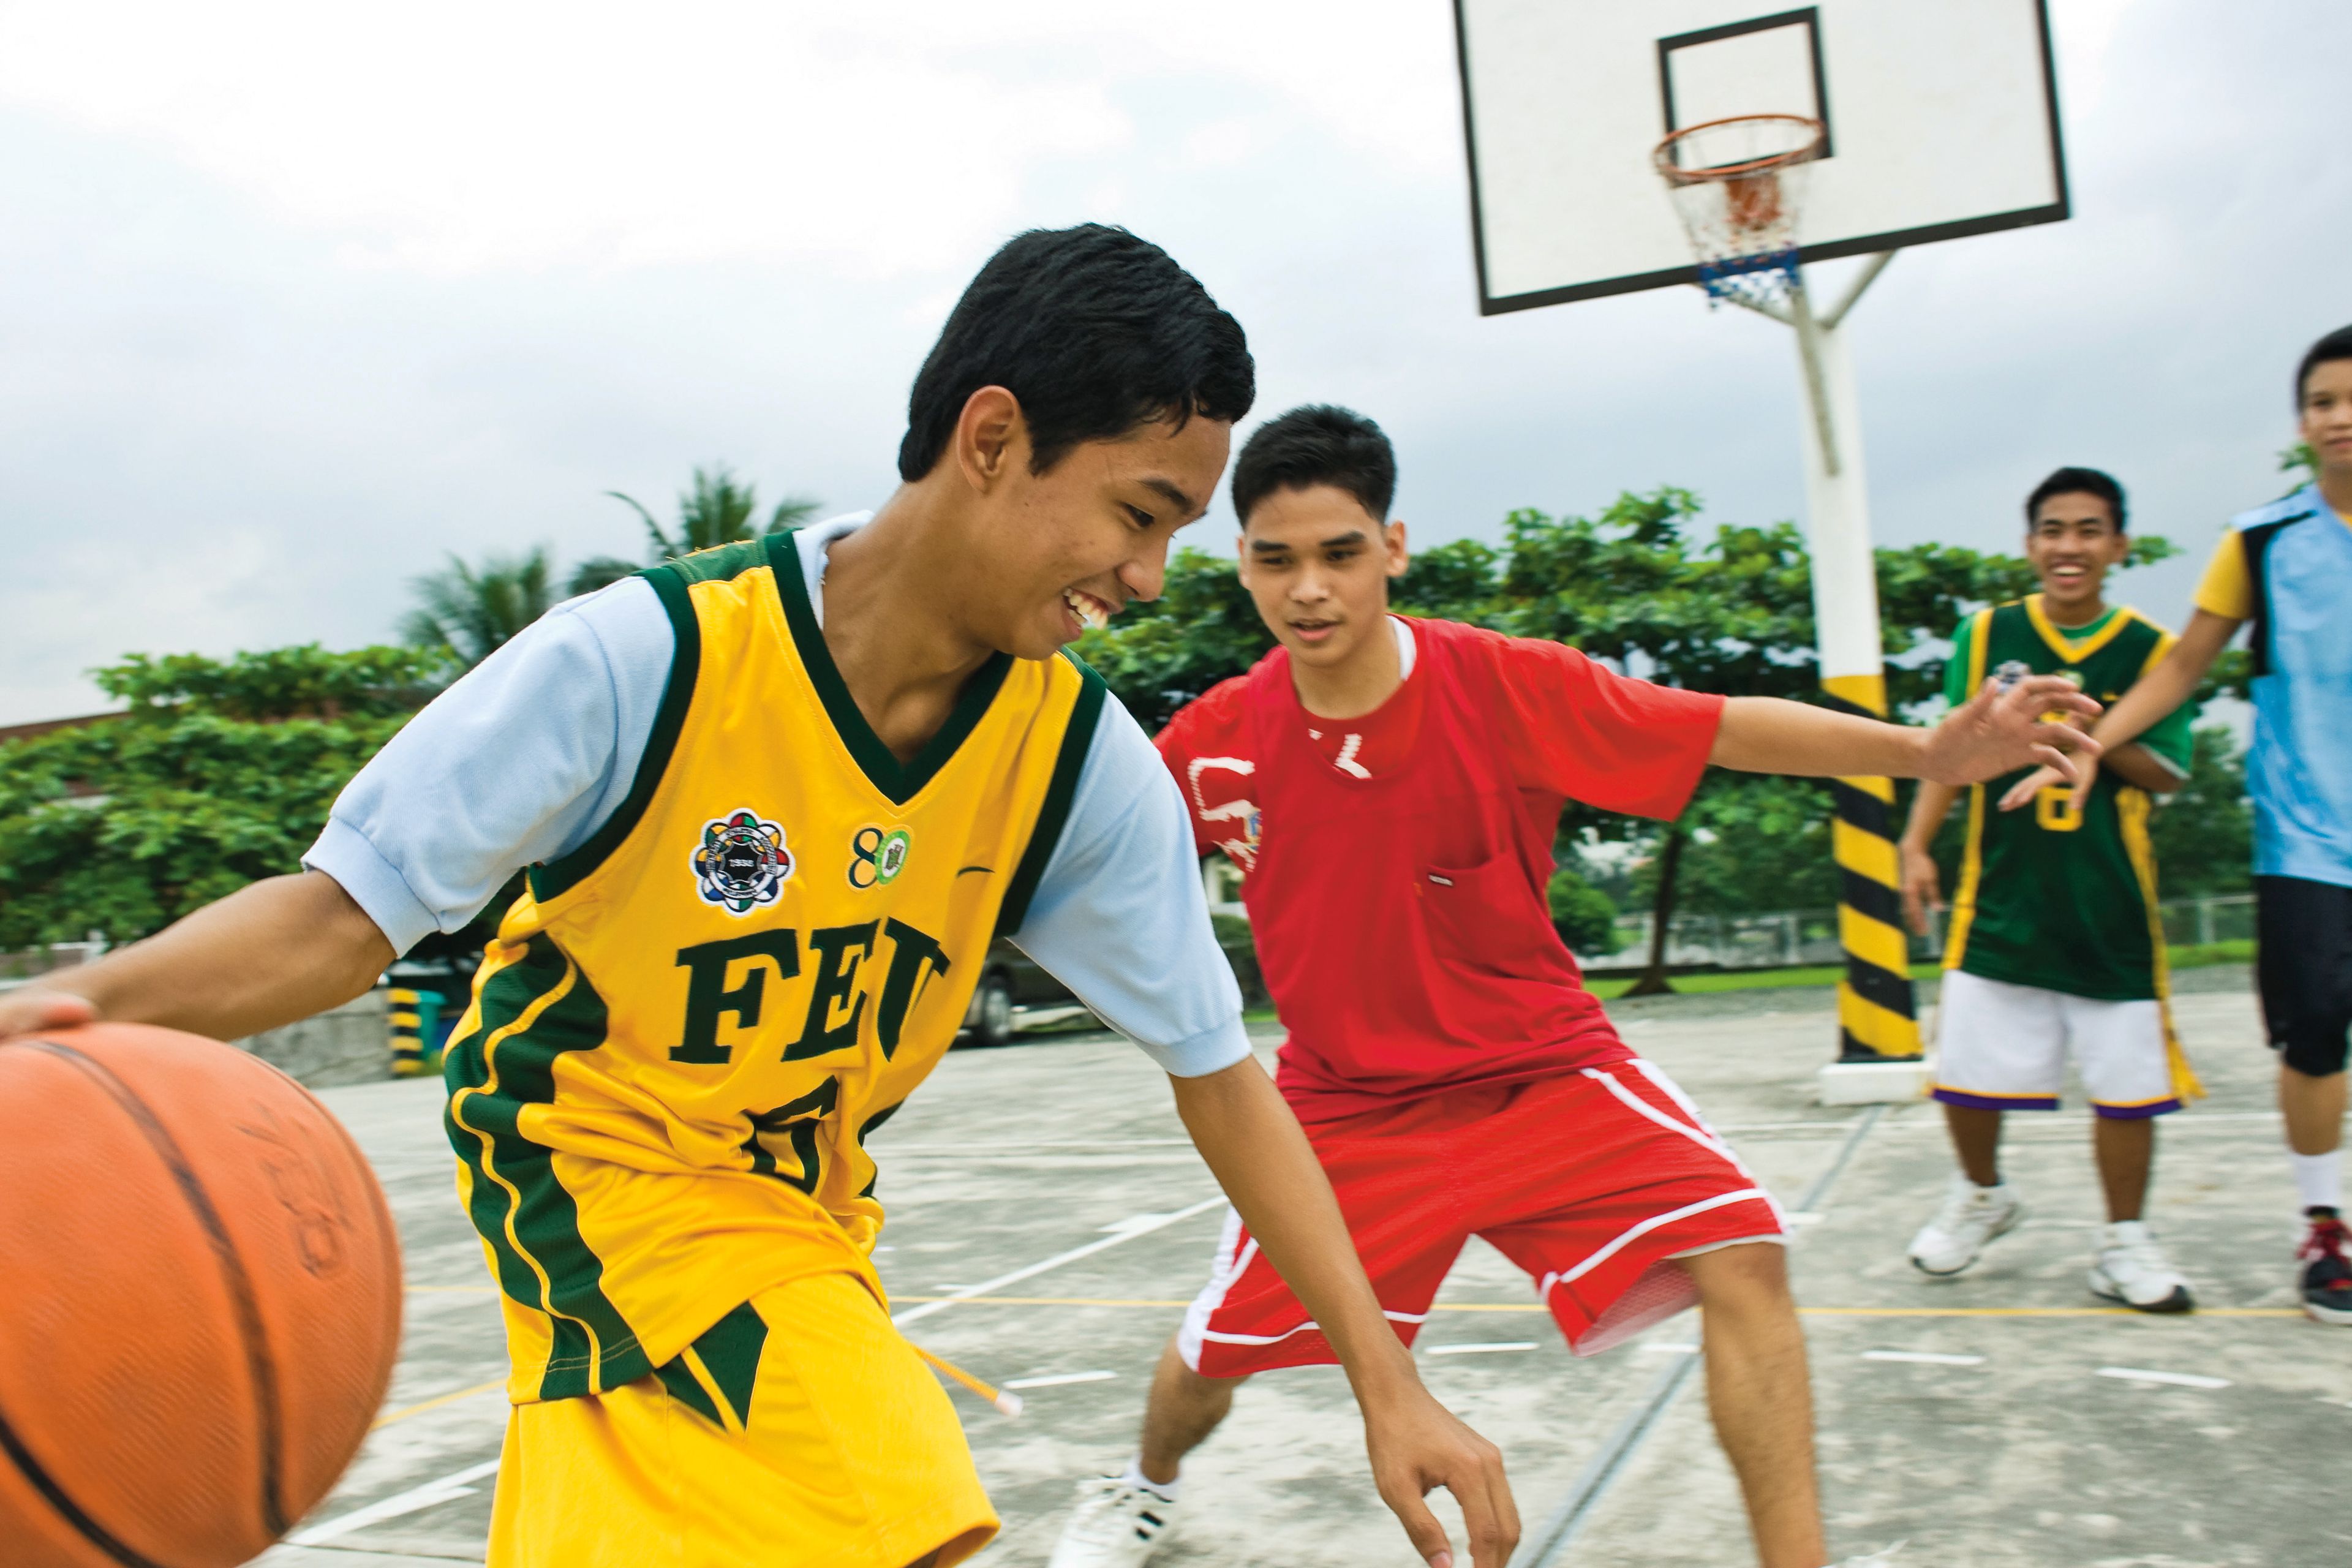 A group of young men playing a game of basketball.